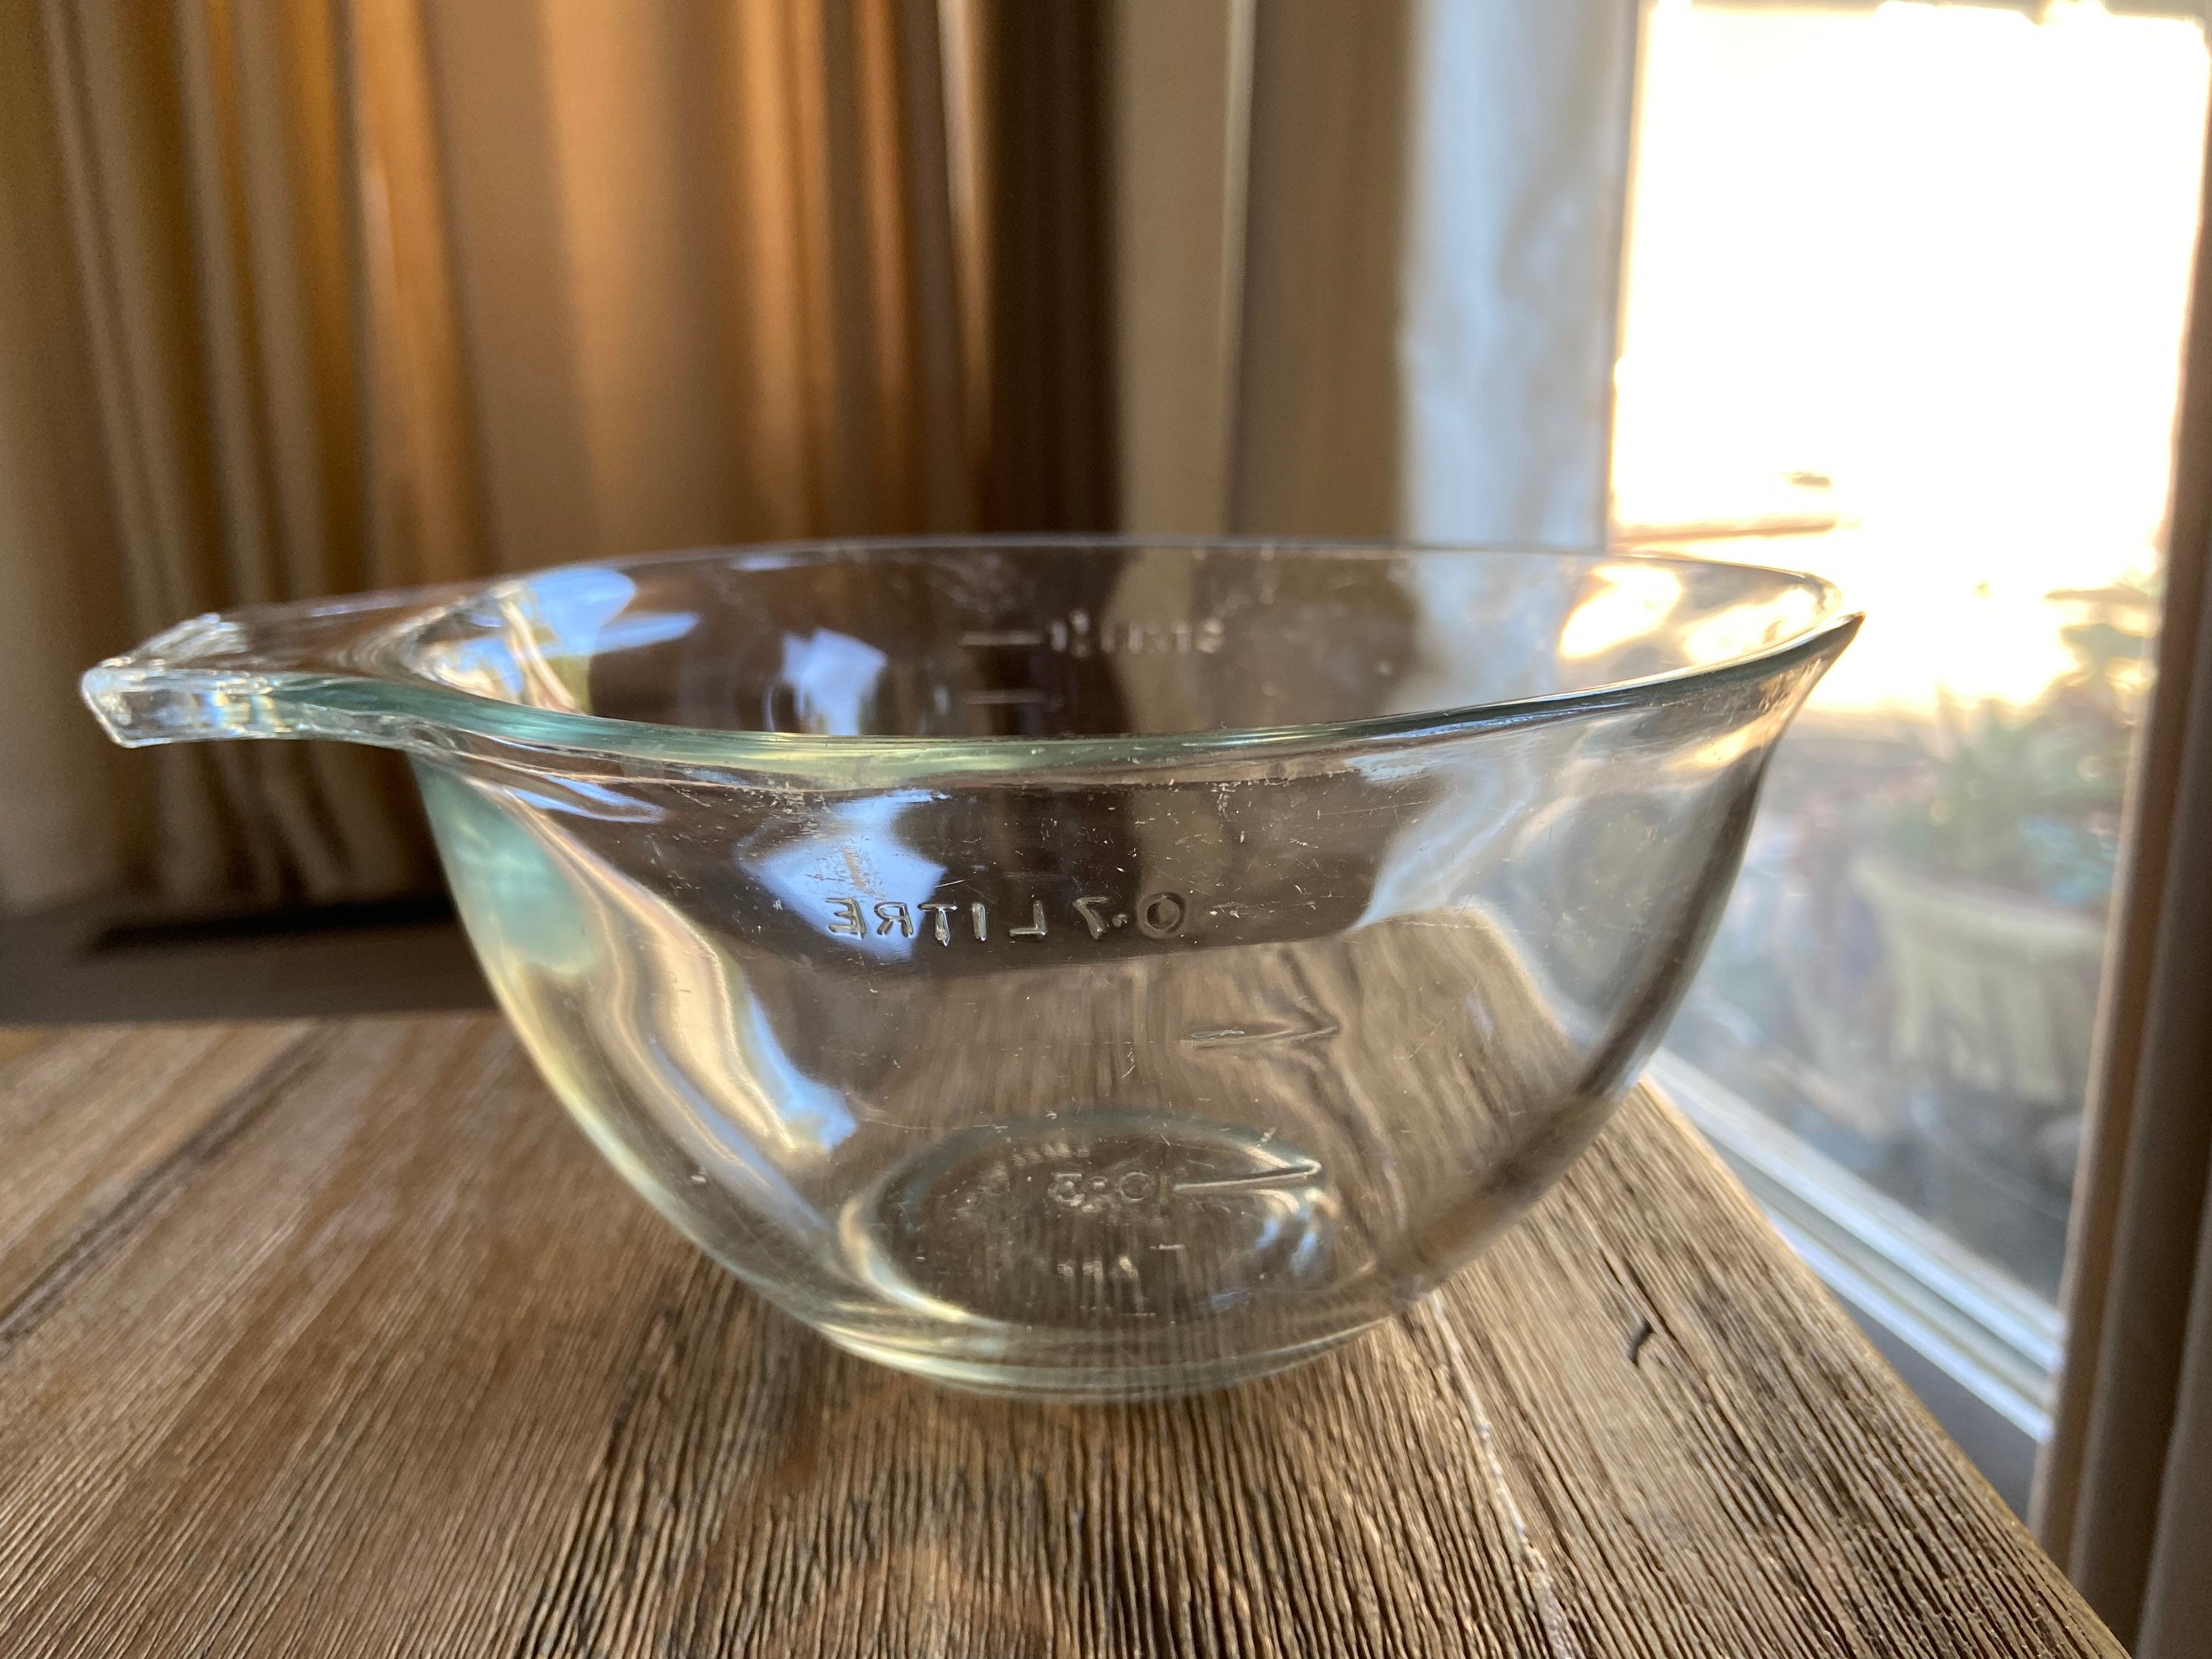 Rare Vintage Pyrex 8 Cup Clear Measuring Bowl Red Lettering Model 564  Corning NY USA 2 Liter Capacity Extra Large Mixing Bowl 